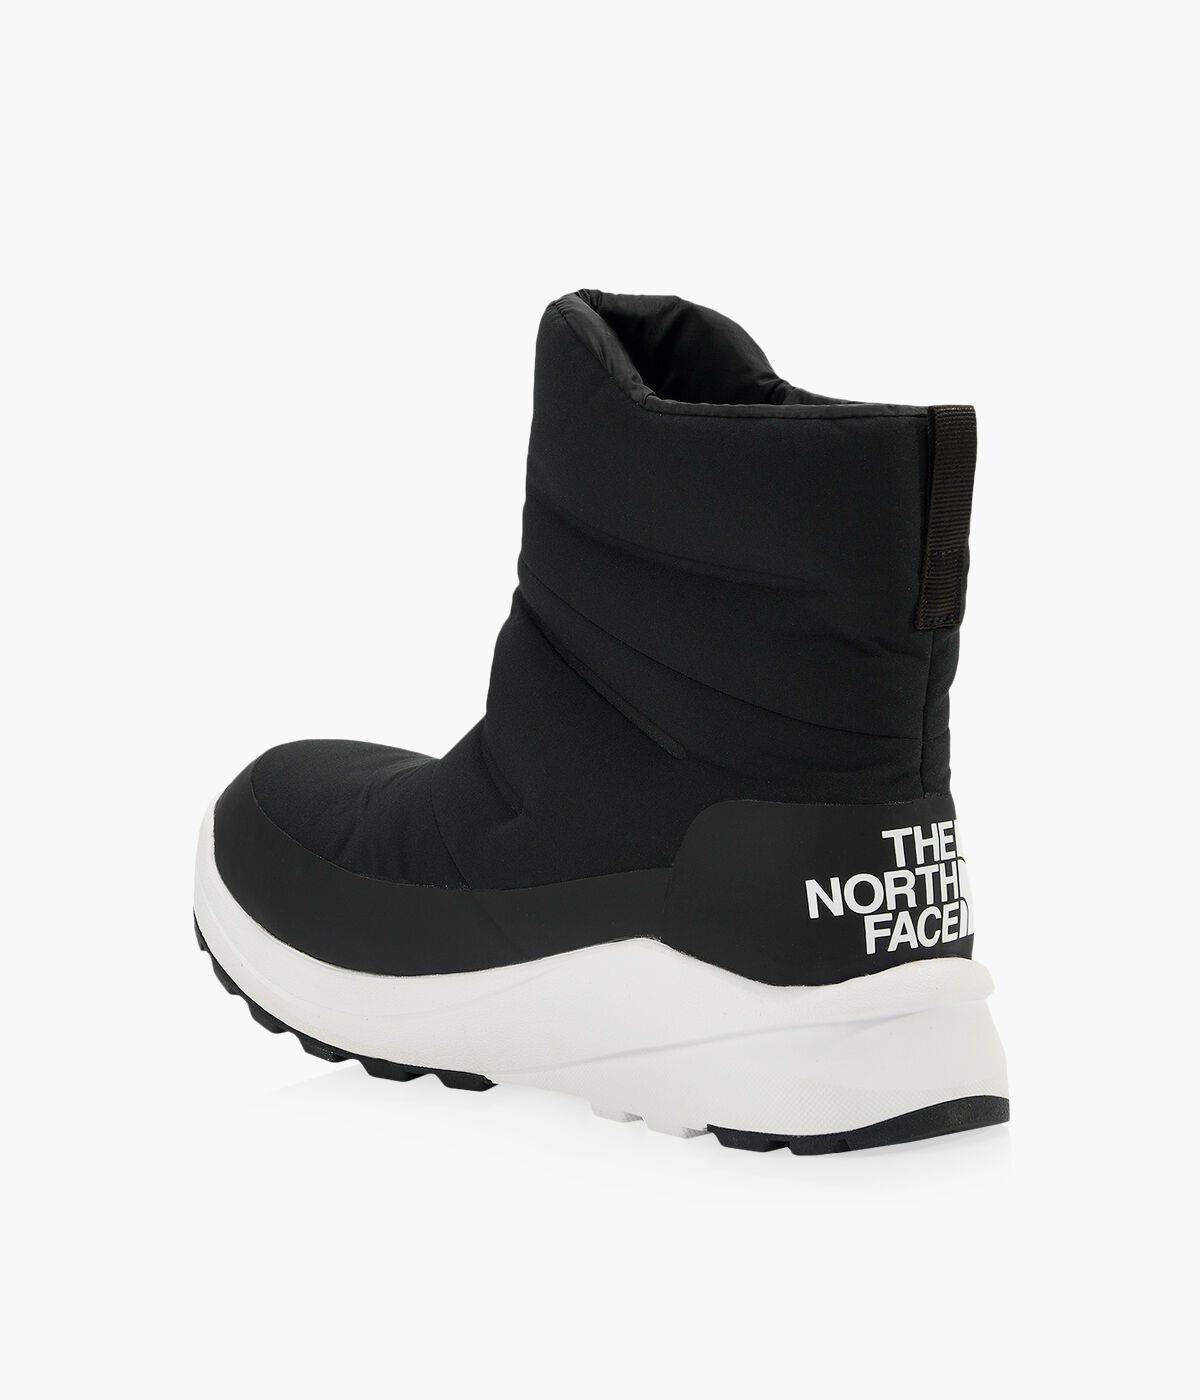 THE NORTH FACE NUPTSE II BOOTIE - Black Nylon | Browns Shoes